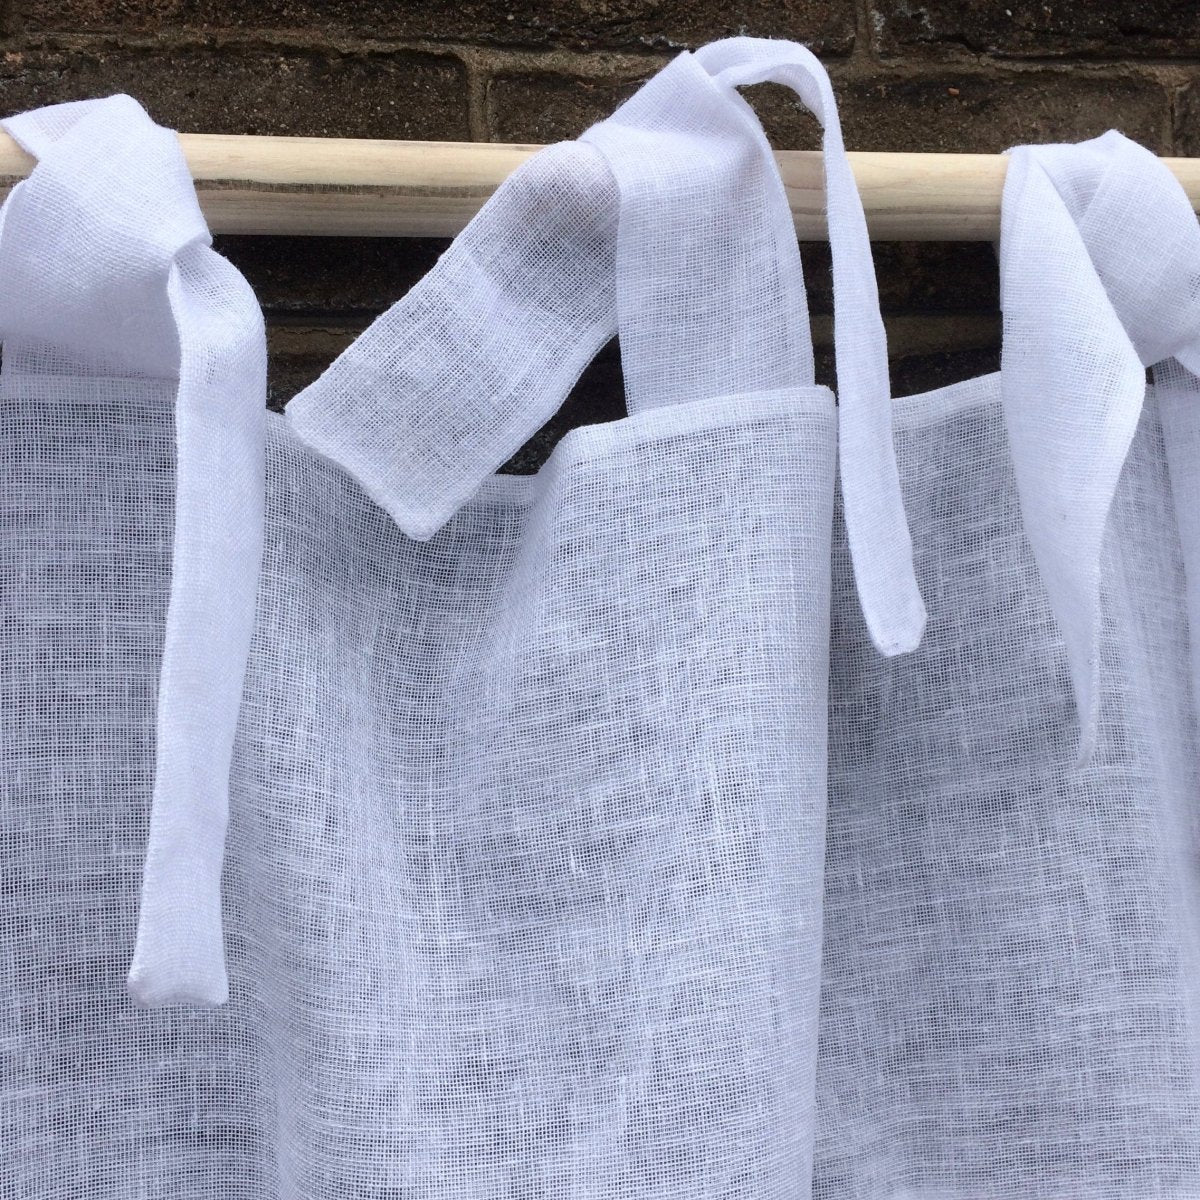 Tyldsley Sheer Tie Top Linen Panel - Linen and Letters